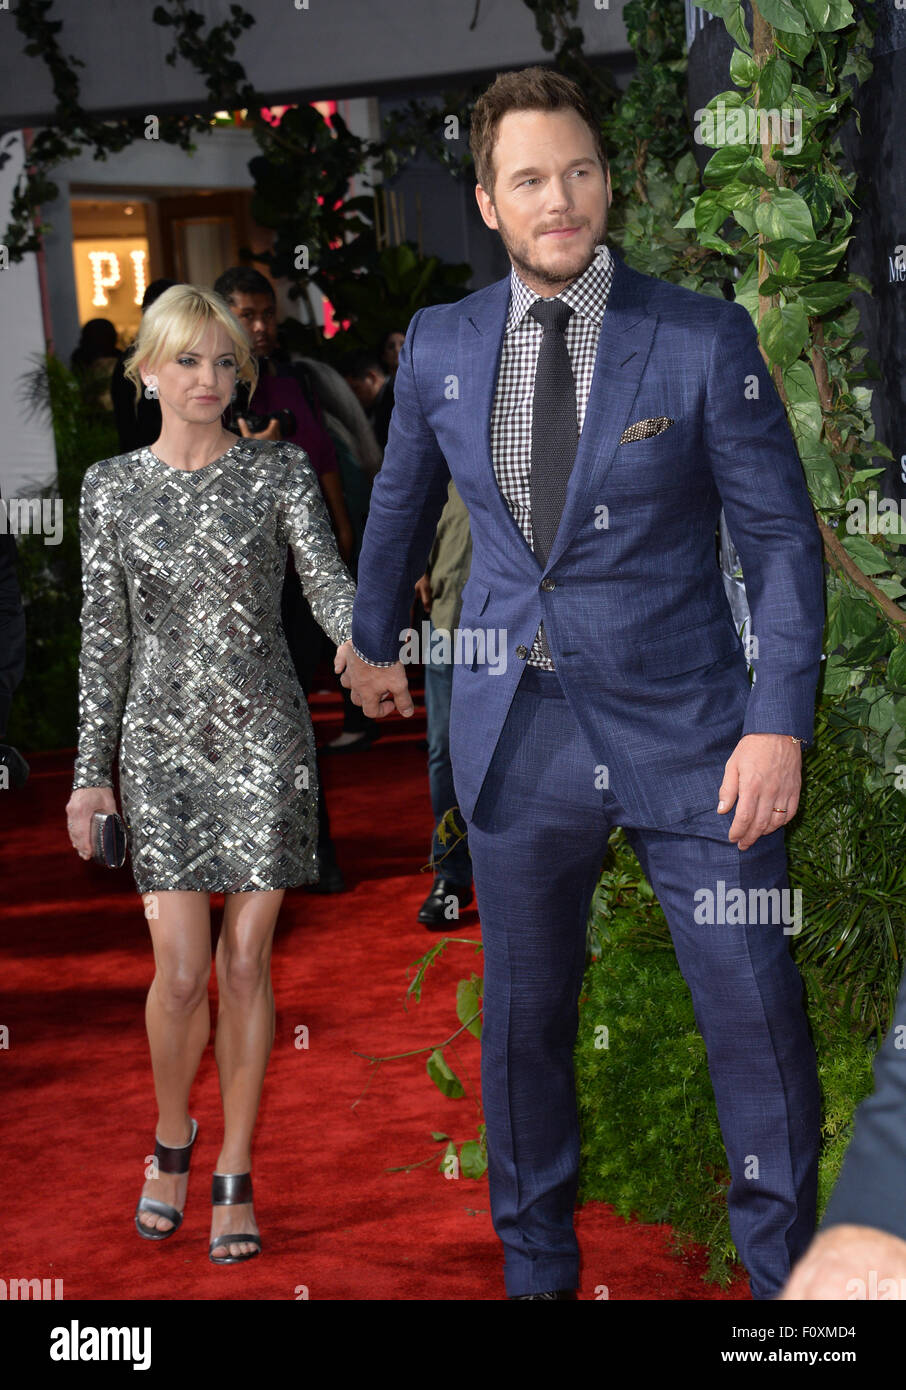 LOS ANGELES, CA - JUNE 10, 2015: Chris Pratt & wife Anna Faris at the world premiere of his movie 'Jurassic World' at the Dolby Theatre, Hollywood. Stock Photo